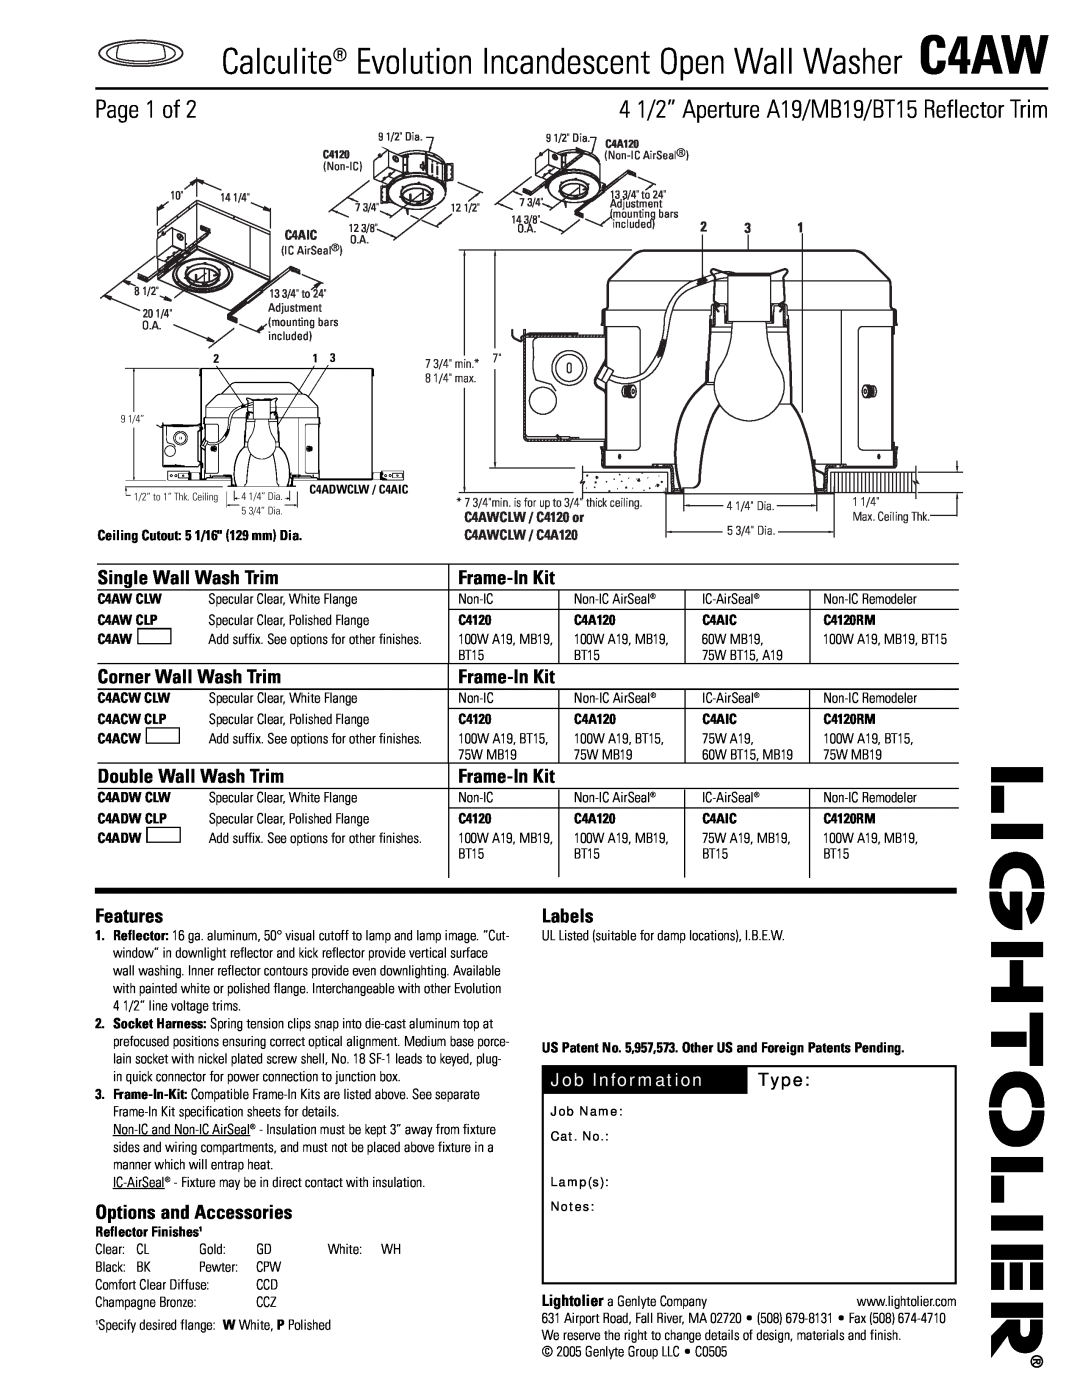 Lightolier C4AW specifications 4 1/2” Aperture A19/MB19/BT15 Reflector Trim, Page 1 of, Single Wall Wash Trim, Features 